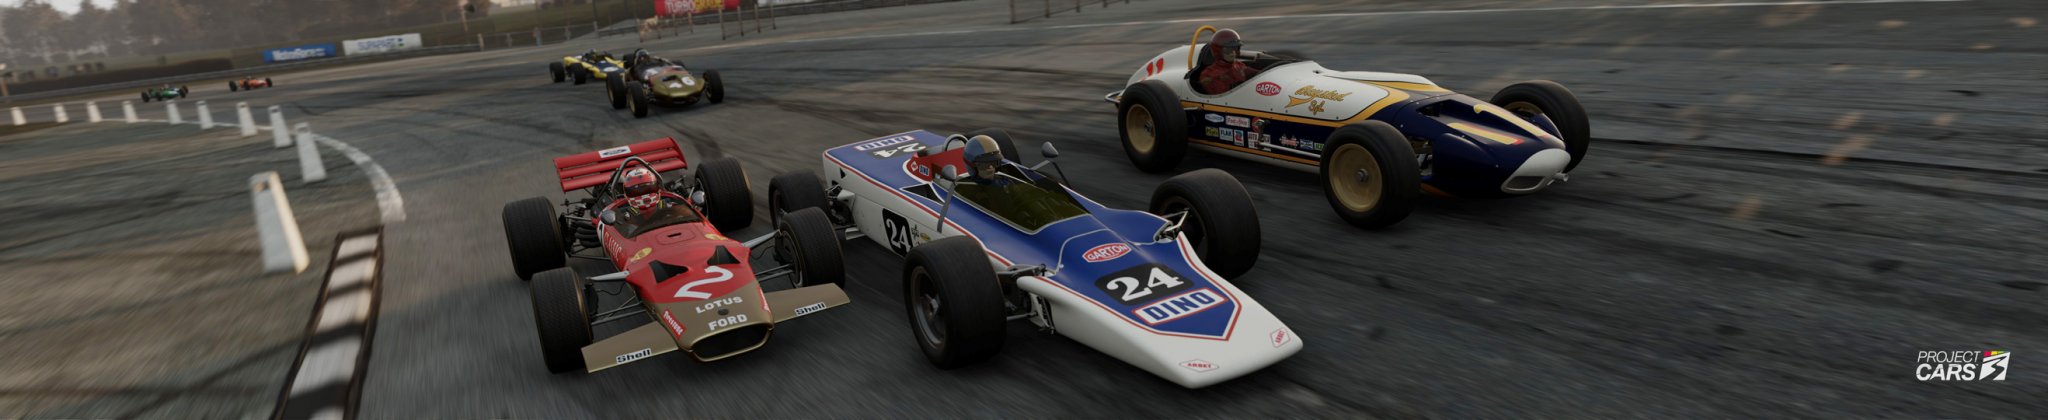 2 PROJECT CARS 3 LOTUS 49C at SILVERSTONE CLASSIC GP crop copy.jpg